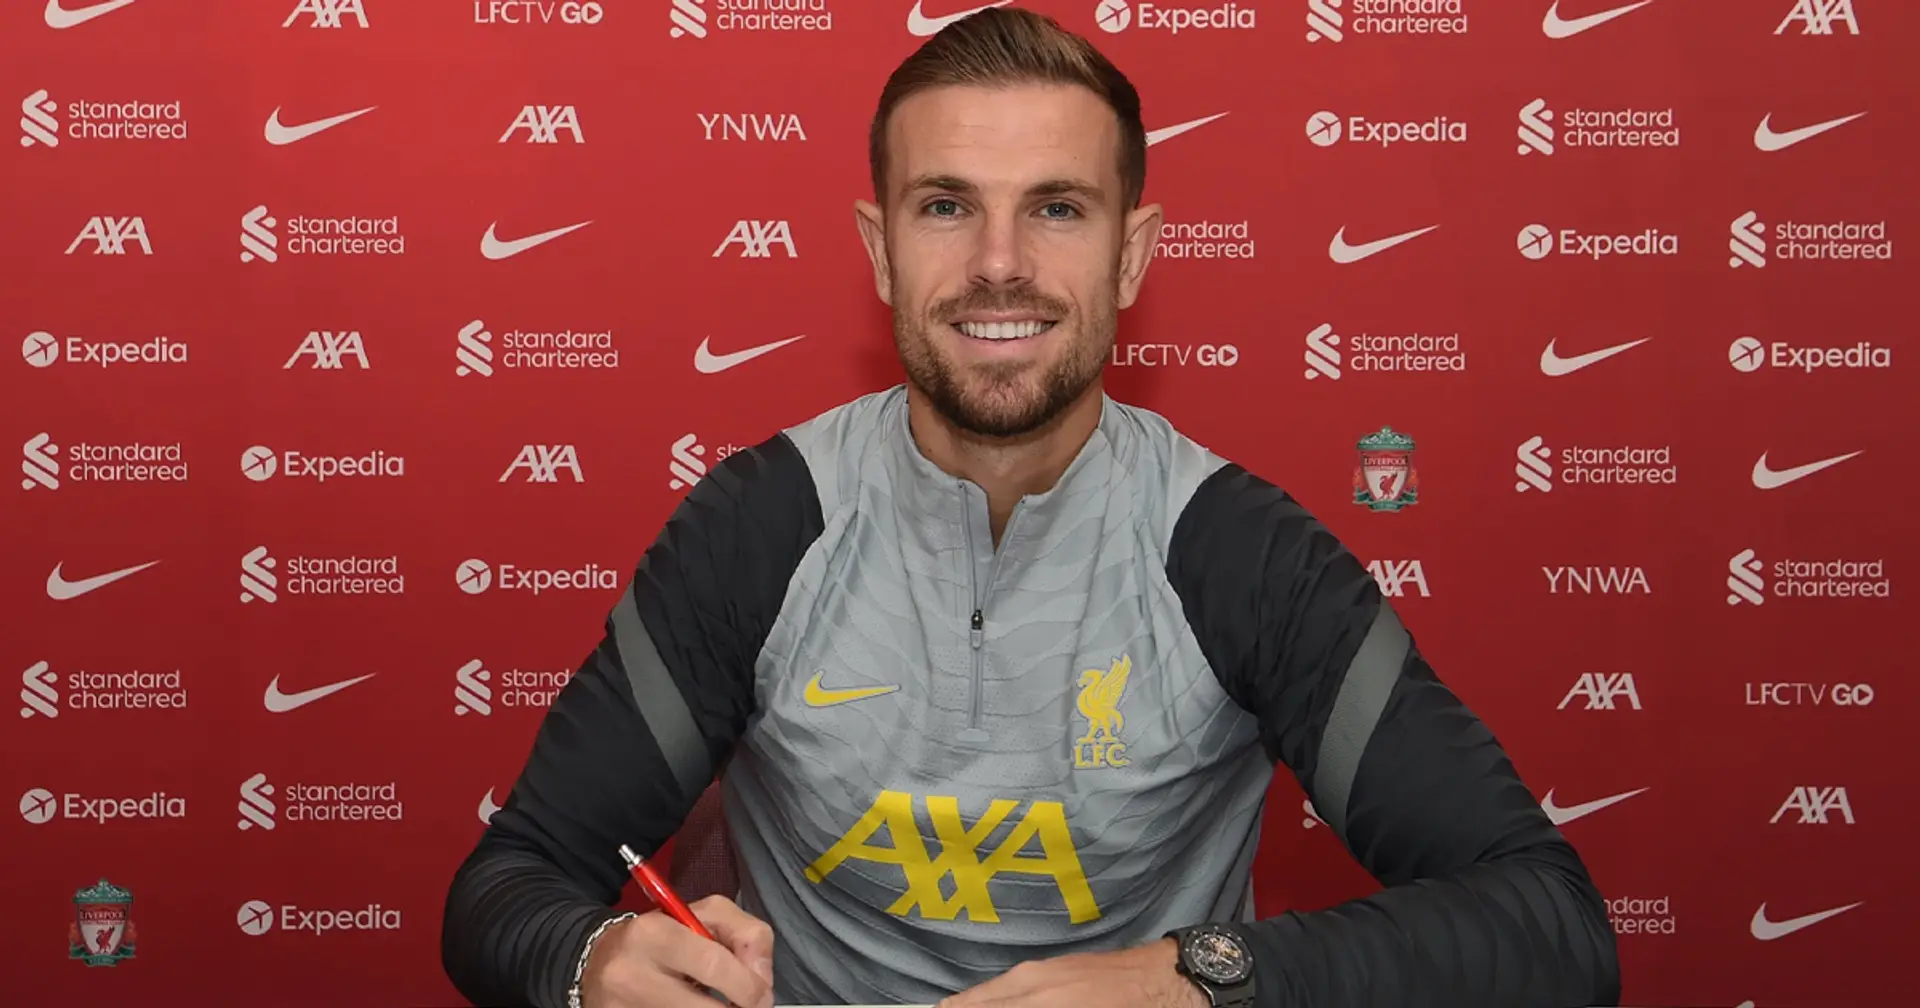 OFFICIAL: Jordan Henderson signs new long-term contract